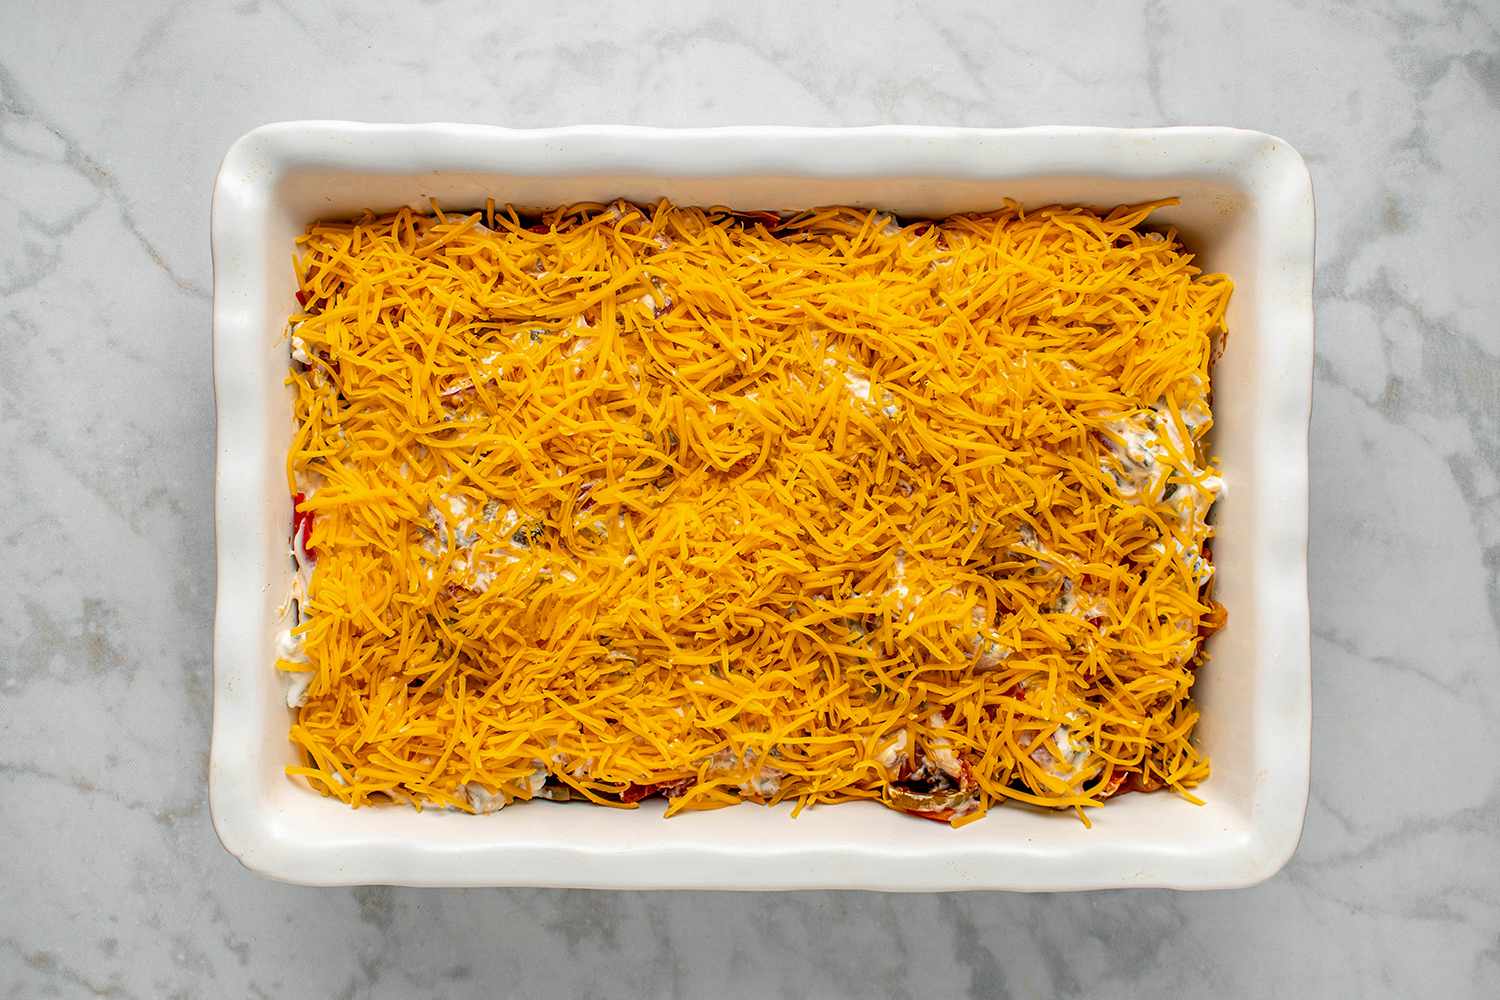 Casserole evenly covered with grated cheddar cheese